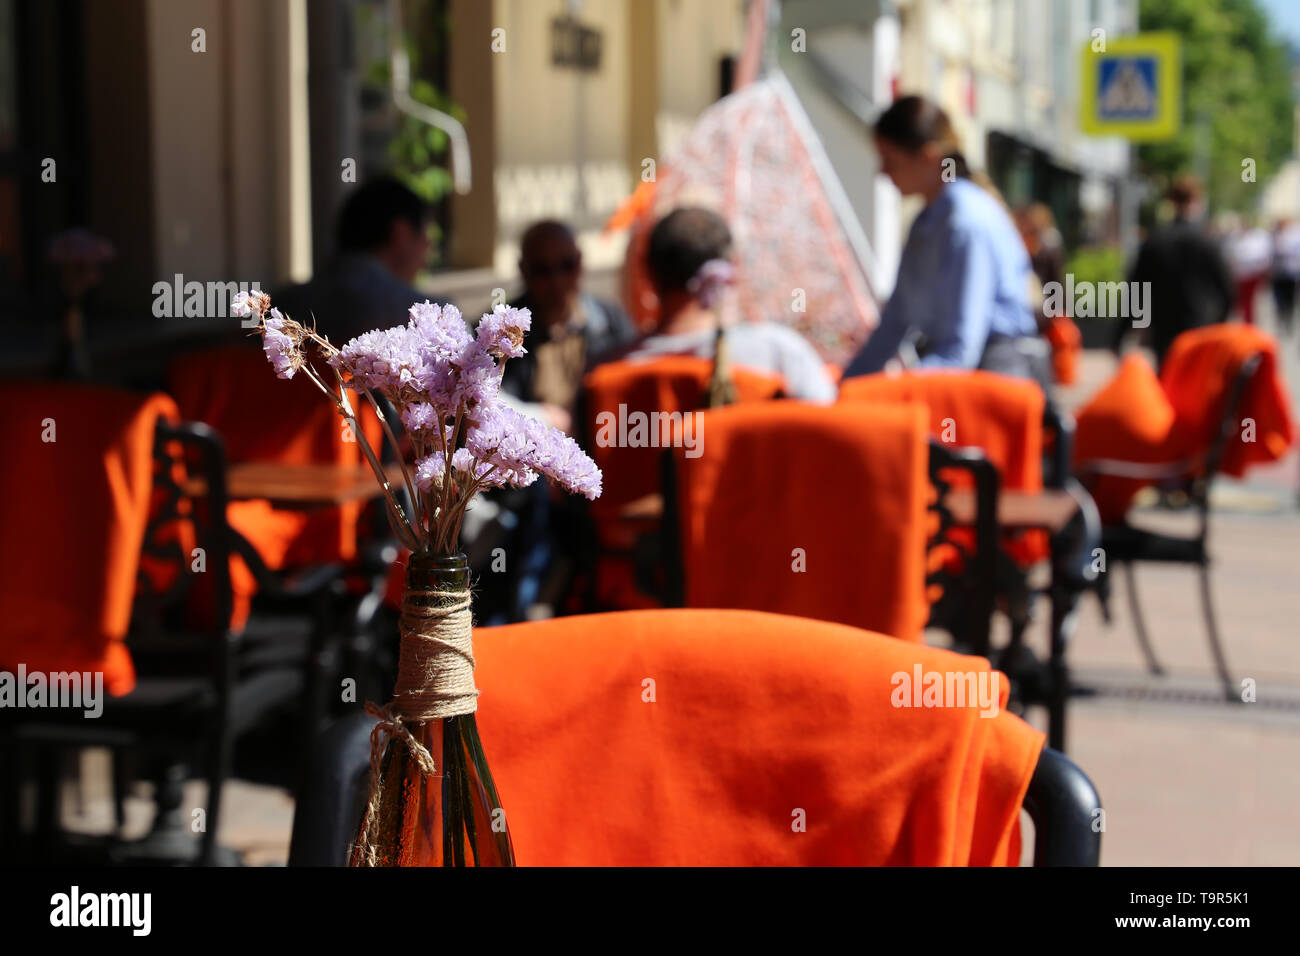 Street cafe, empty tables in a restaurant outdoor. Romantic dinner in summer city, visitors and waiter, elegant setting for celebration and date Stock Photo